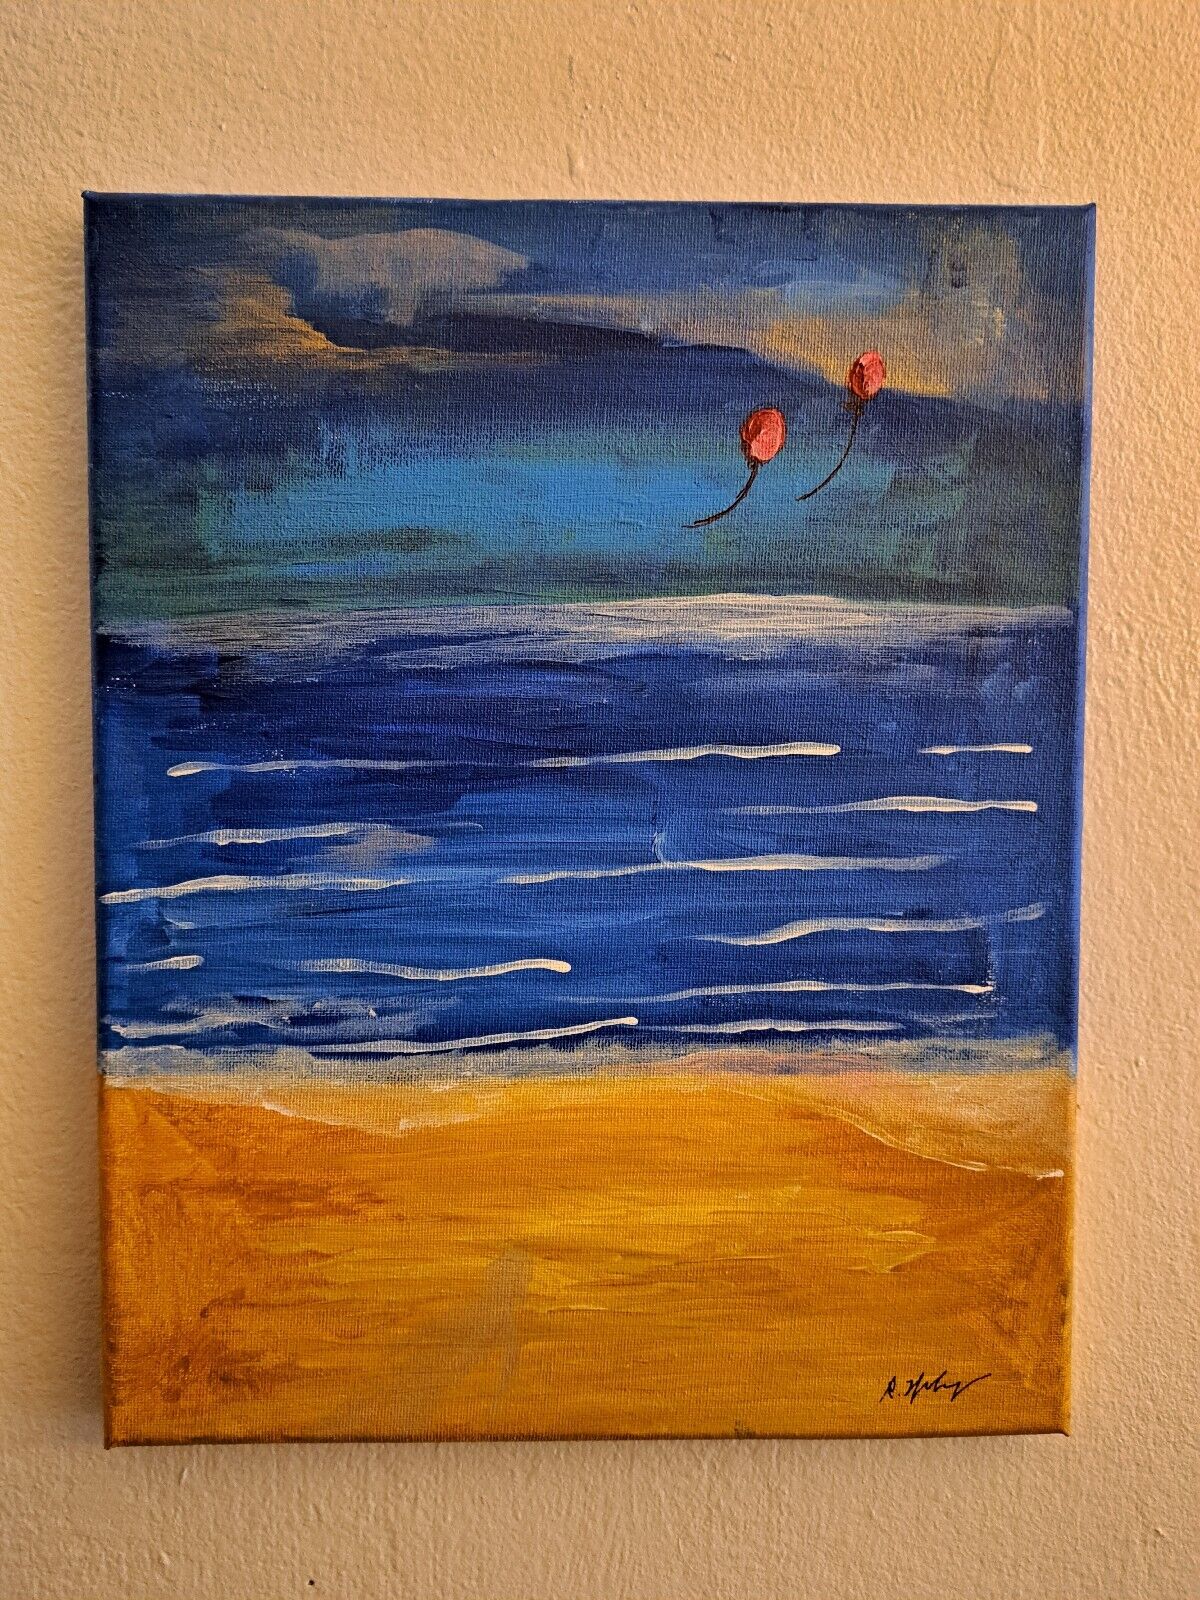 HOKi-painting of Beach,blue Beachscape,OOAK,GIFT,14x11,wall decor,LIMITED,Signed